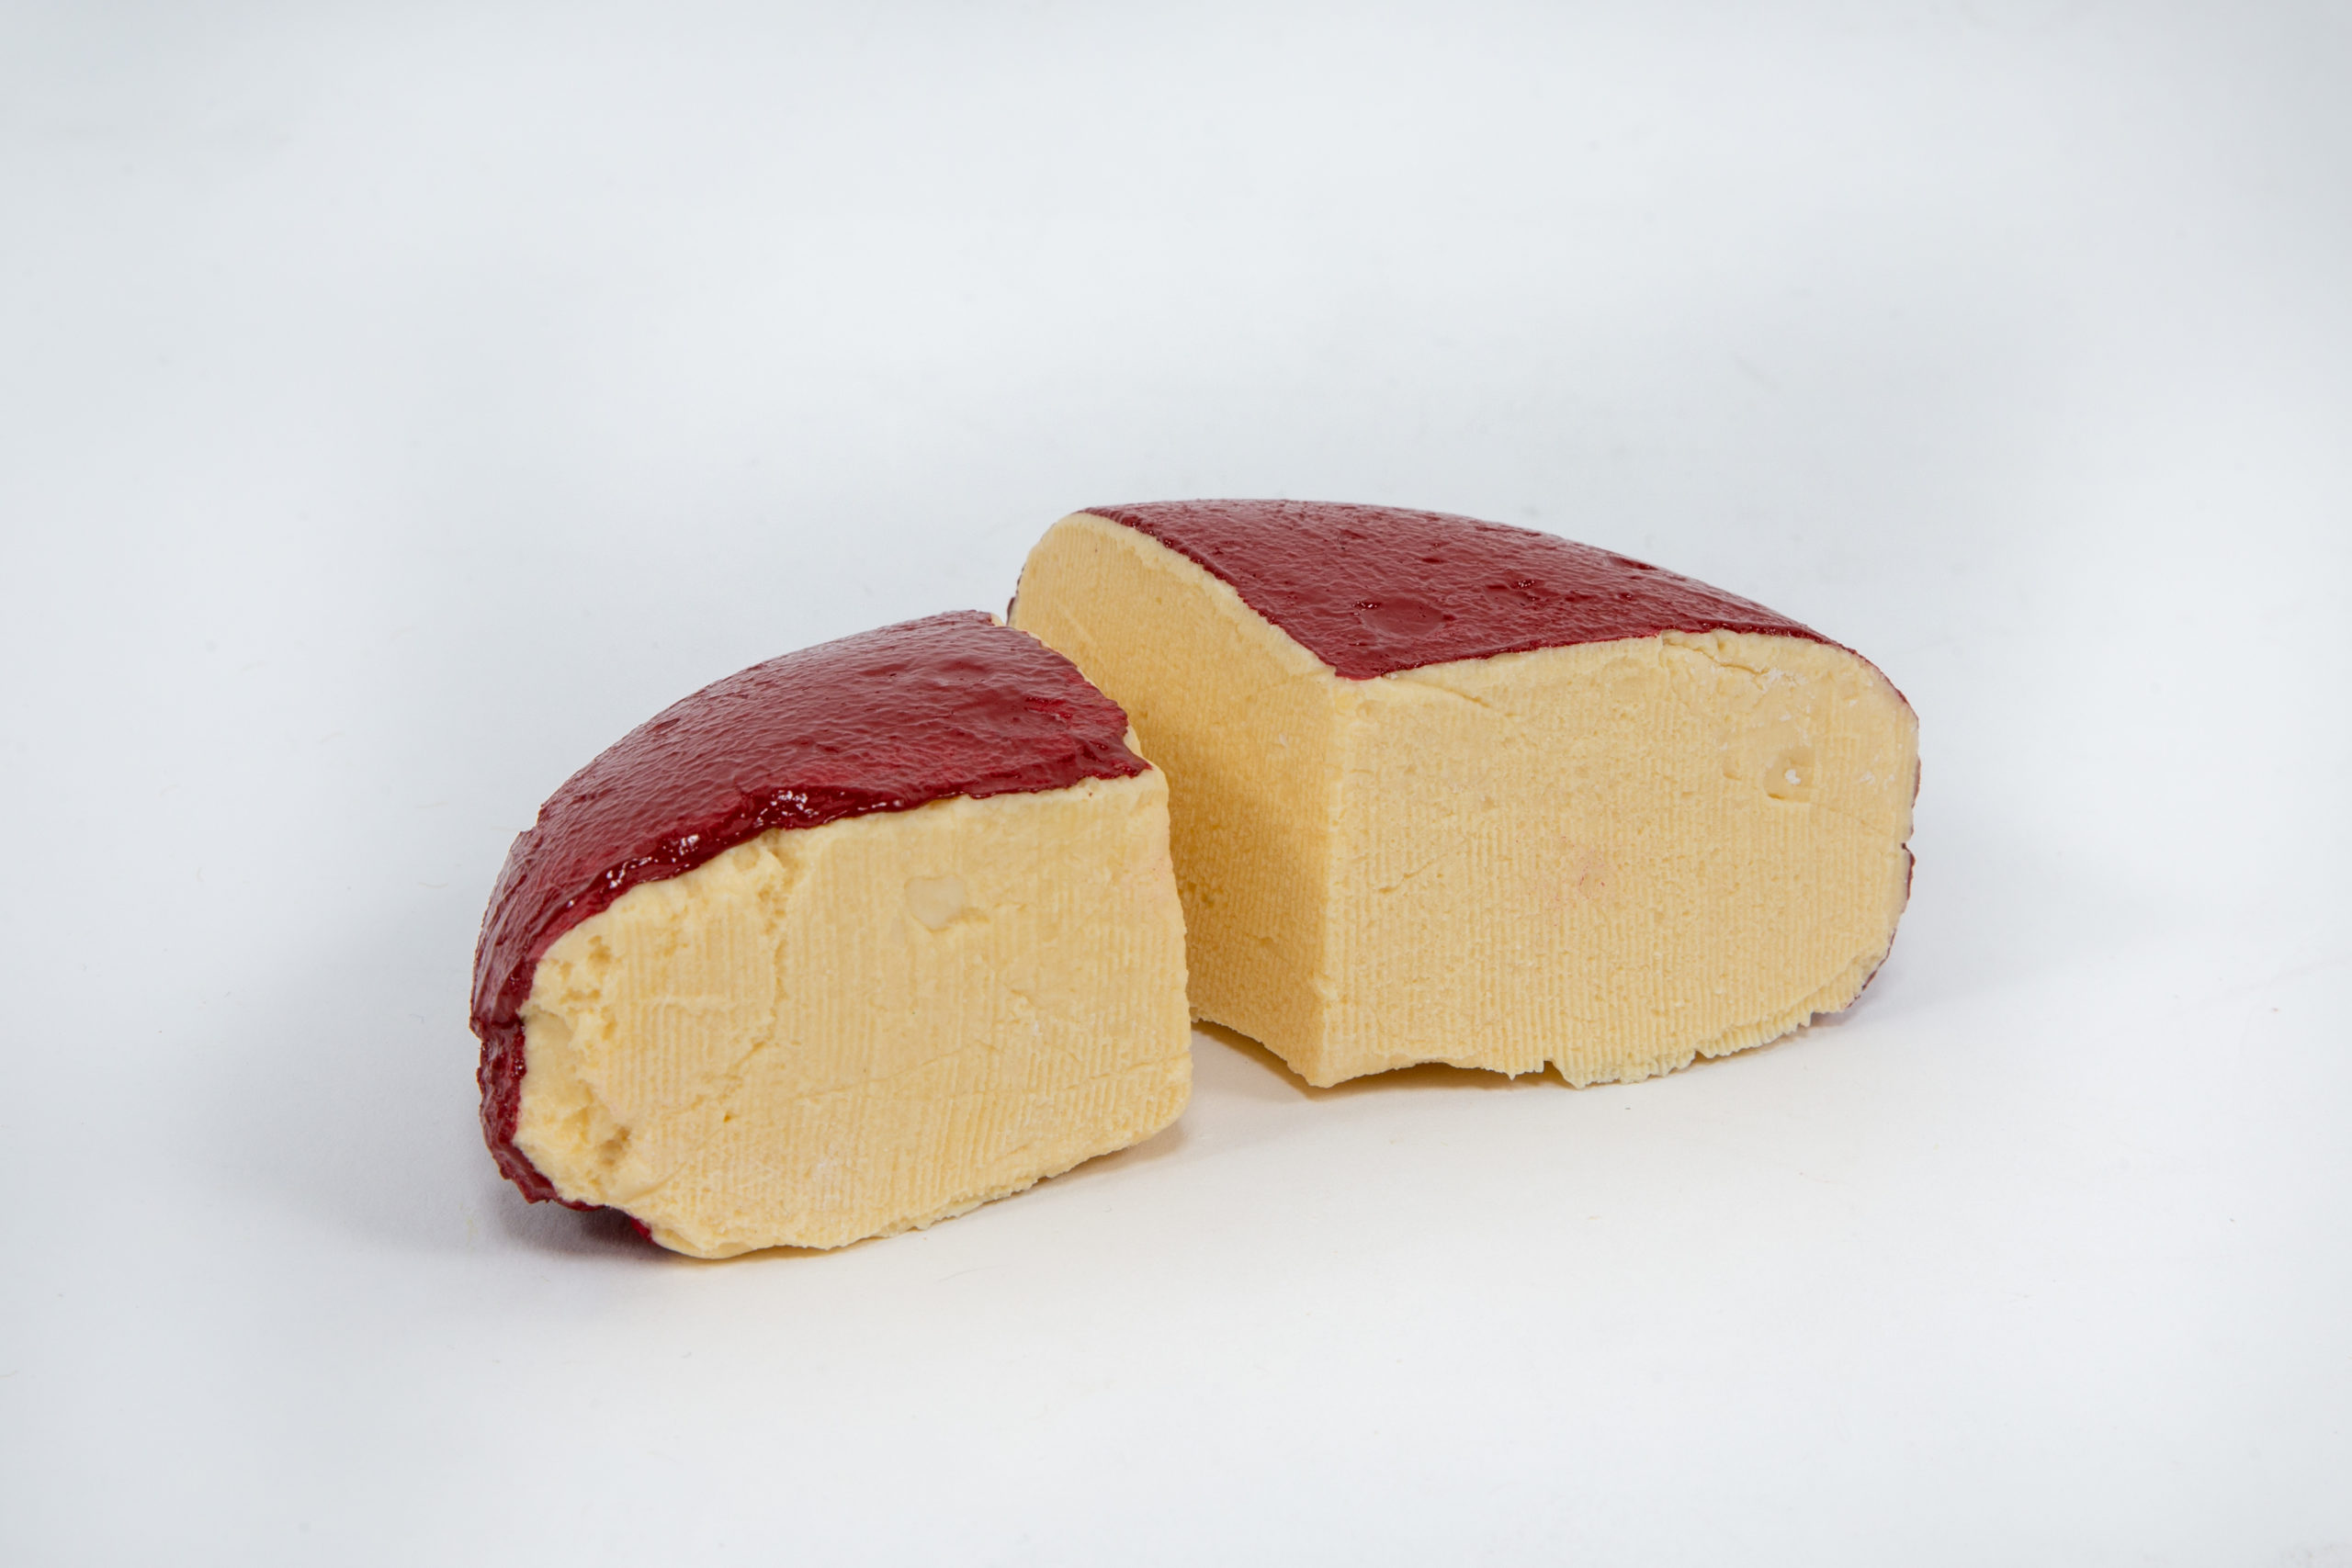 Smoked Gouda Cheese Red Rind (set of 2) | Just Dough It!